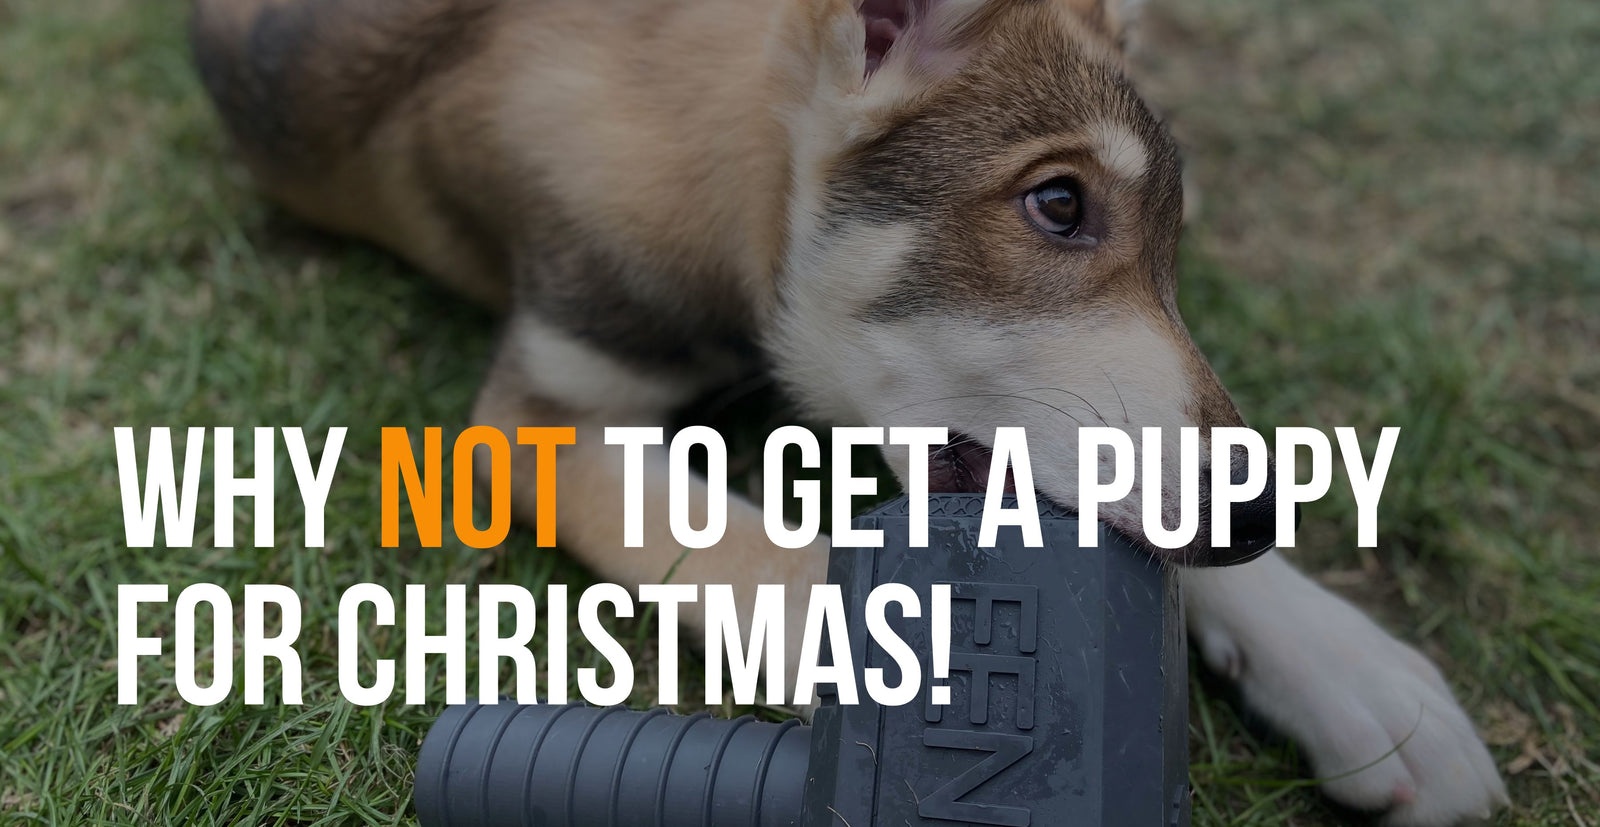 Puppies as Gifts for Christmas: Is it a bad idea? – Fenrir Canine